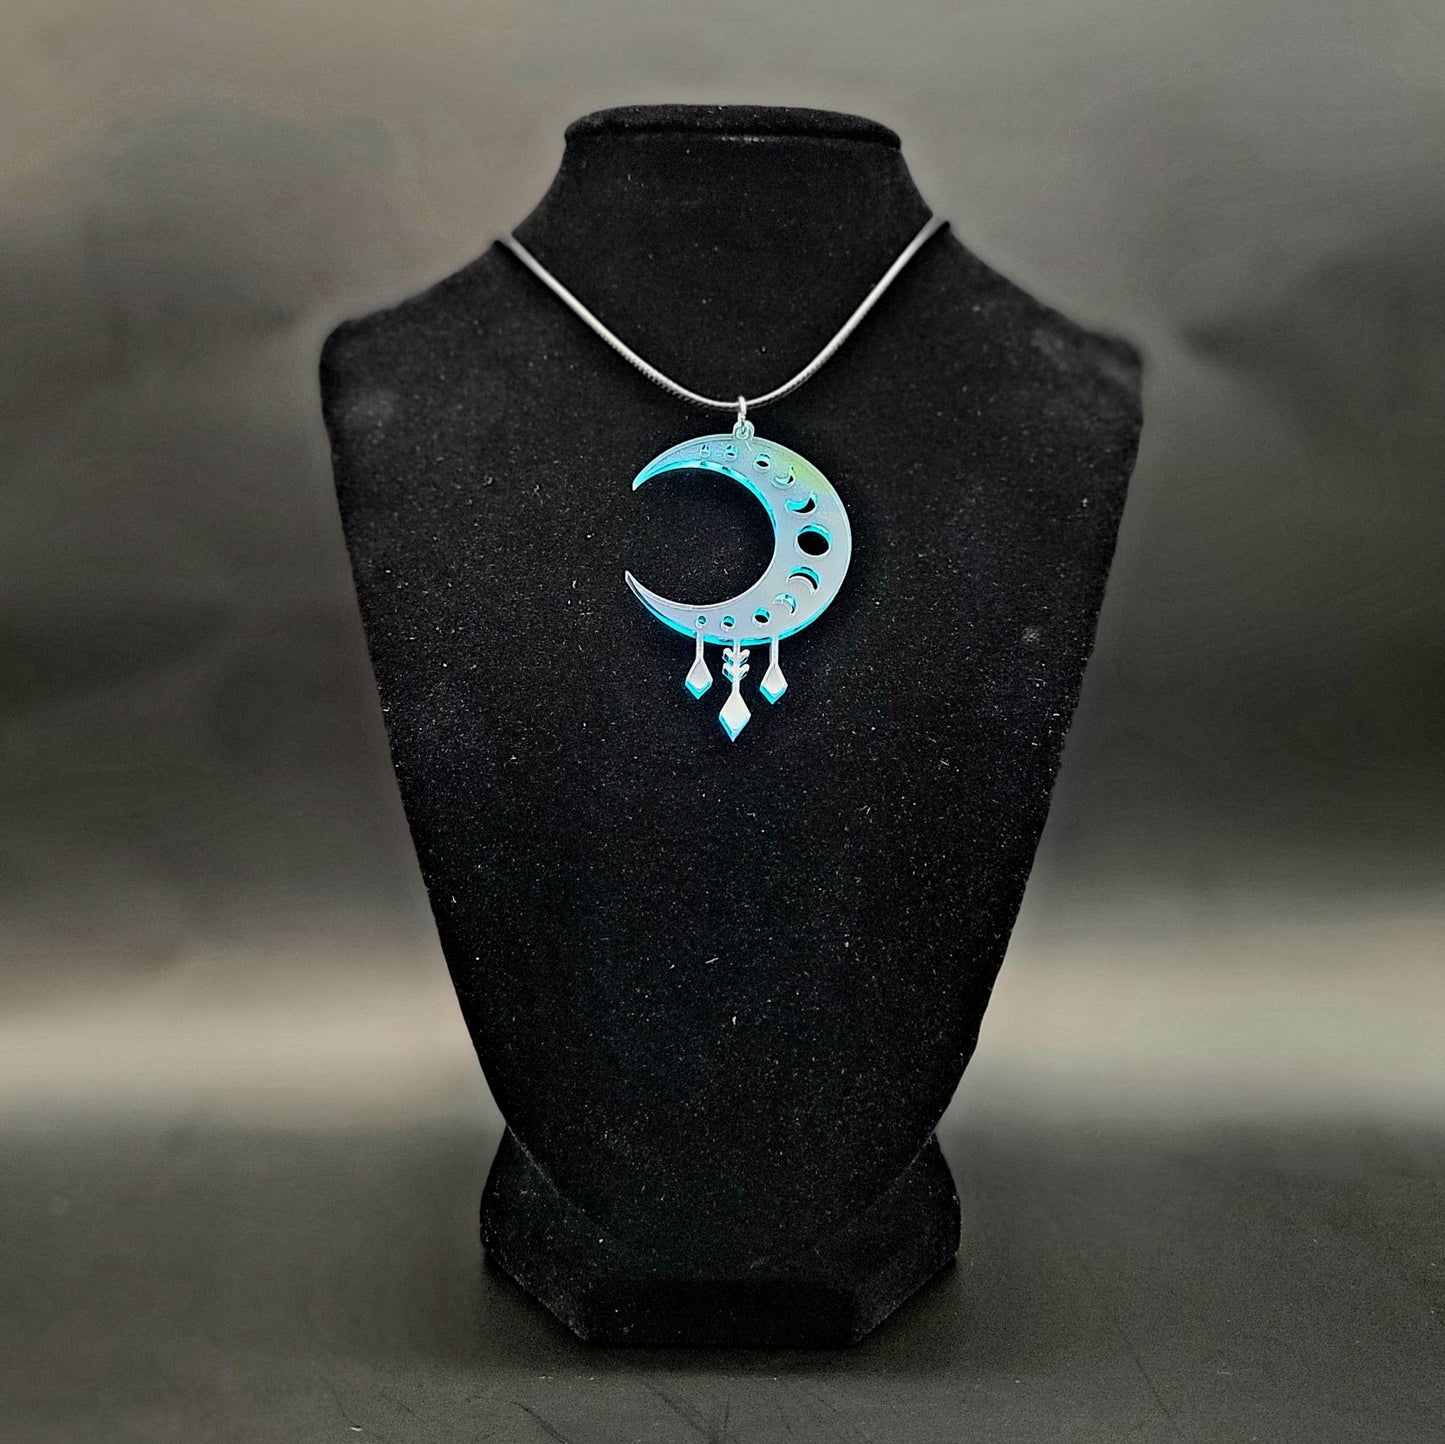 Crescent Moon Necklace - available in Pink, Turquoise, & Orange